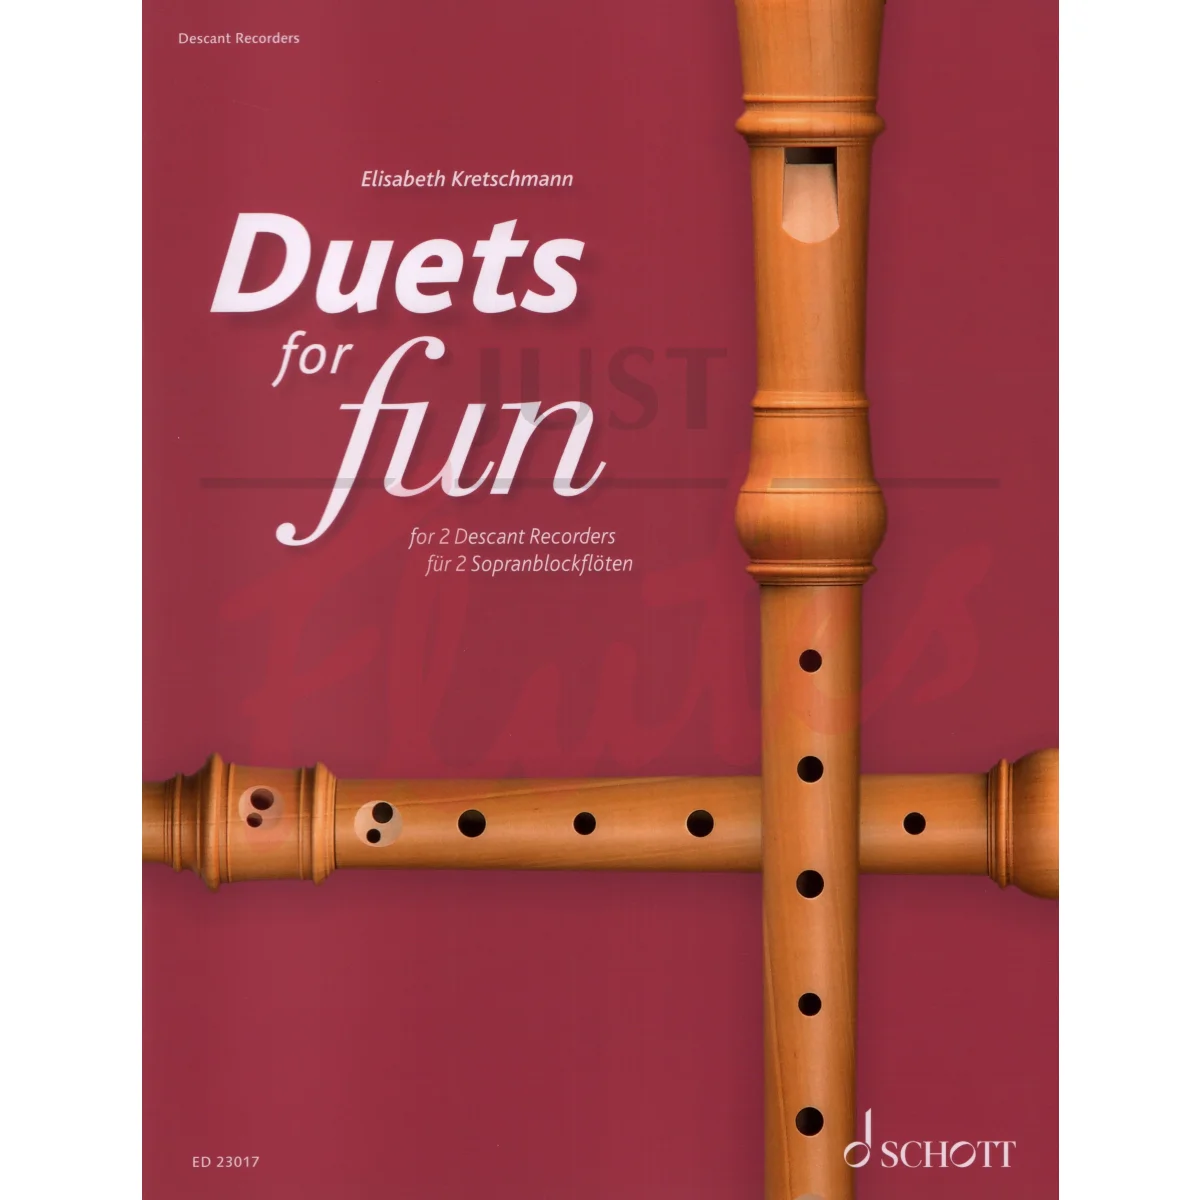 Duets for Fun for Two Descant Recorders